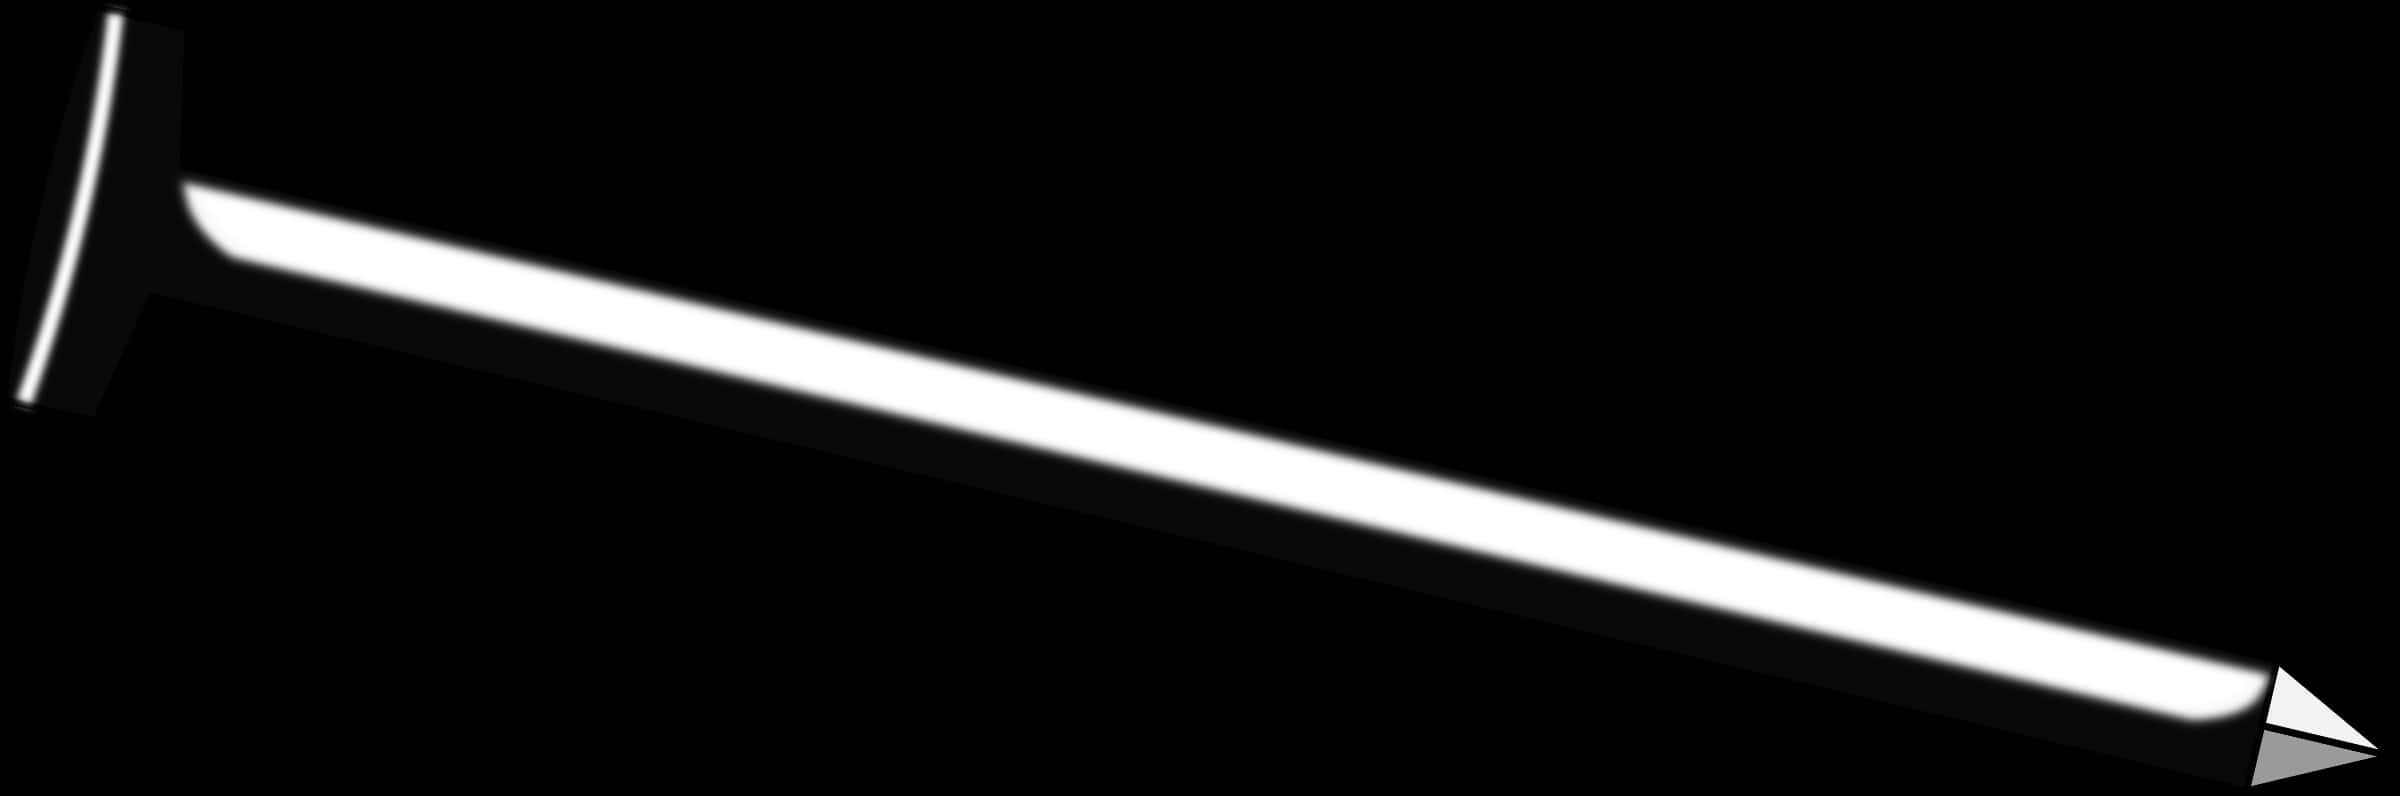 Single Steel Nail Black Background PNG